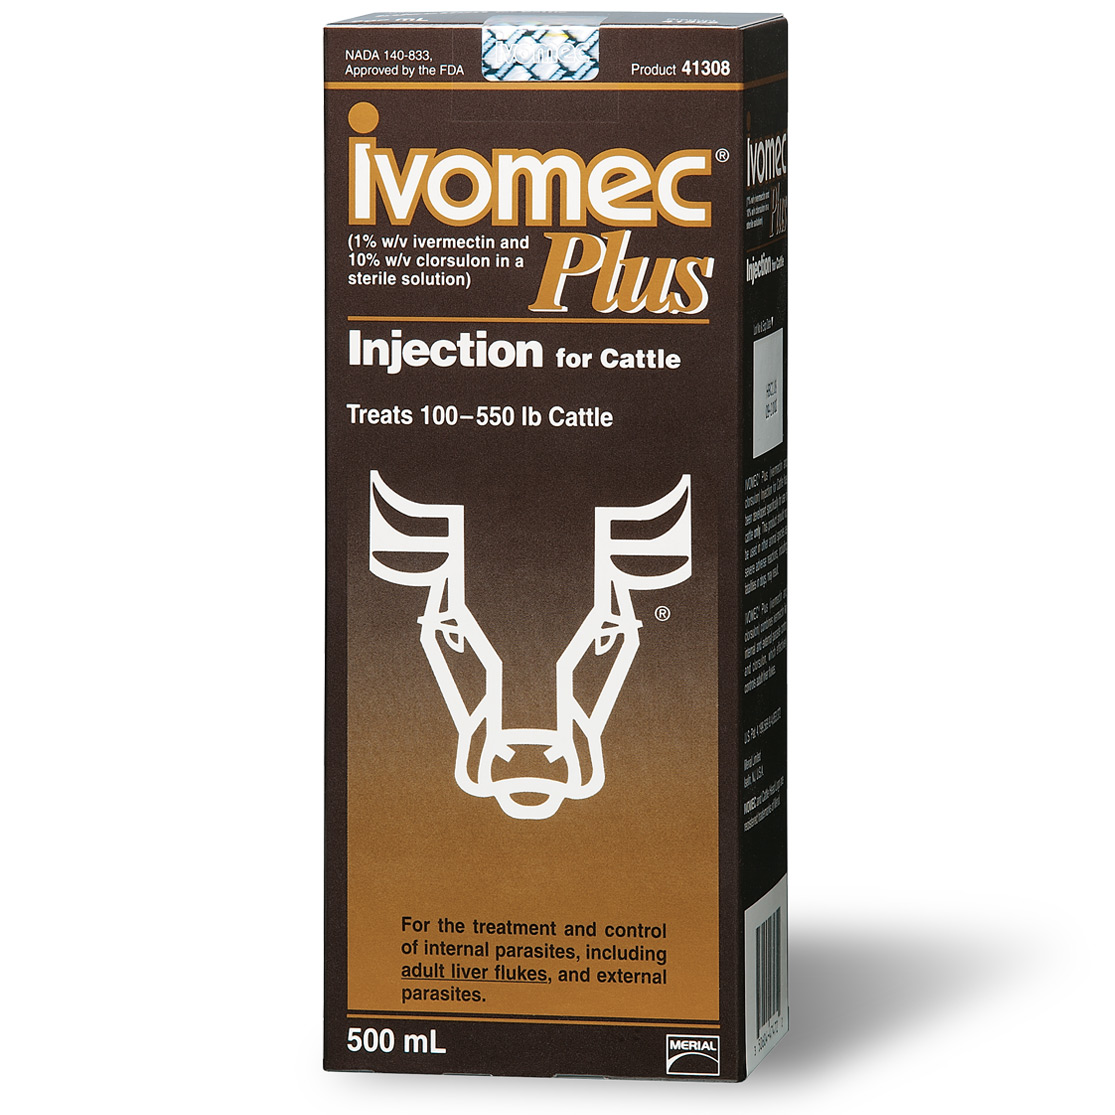 Ivomec, a pour on dewormer with broad spectrum of protection, efficacy and duration.